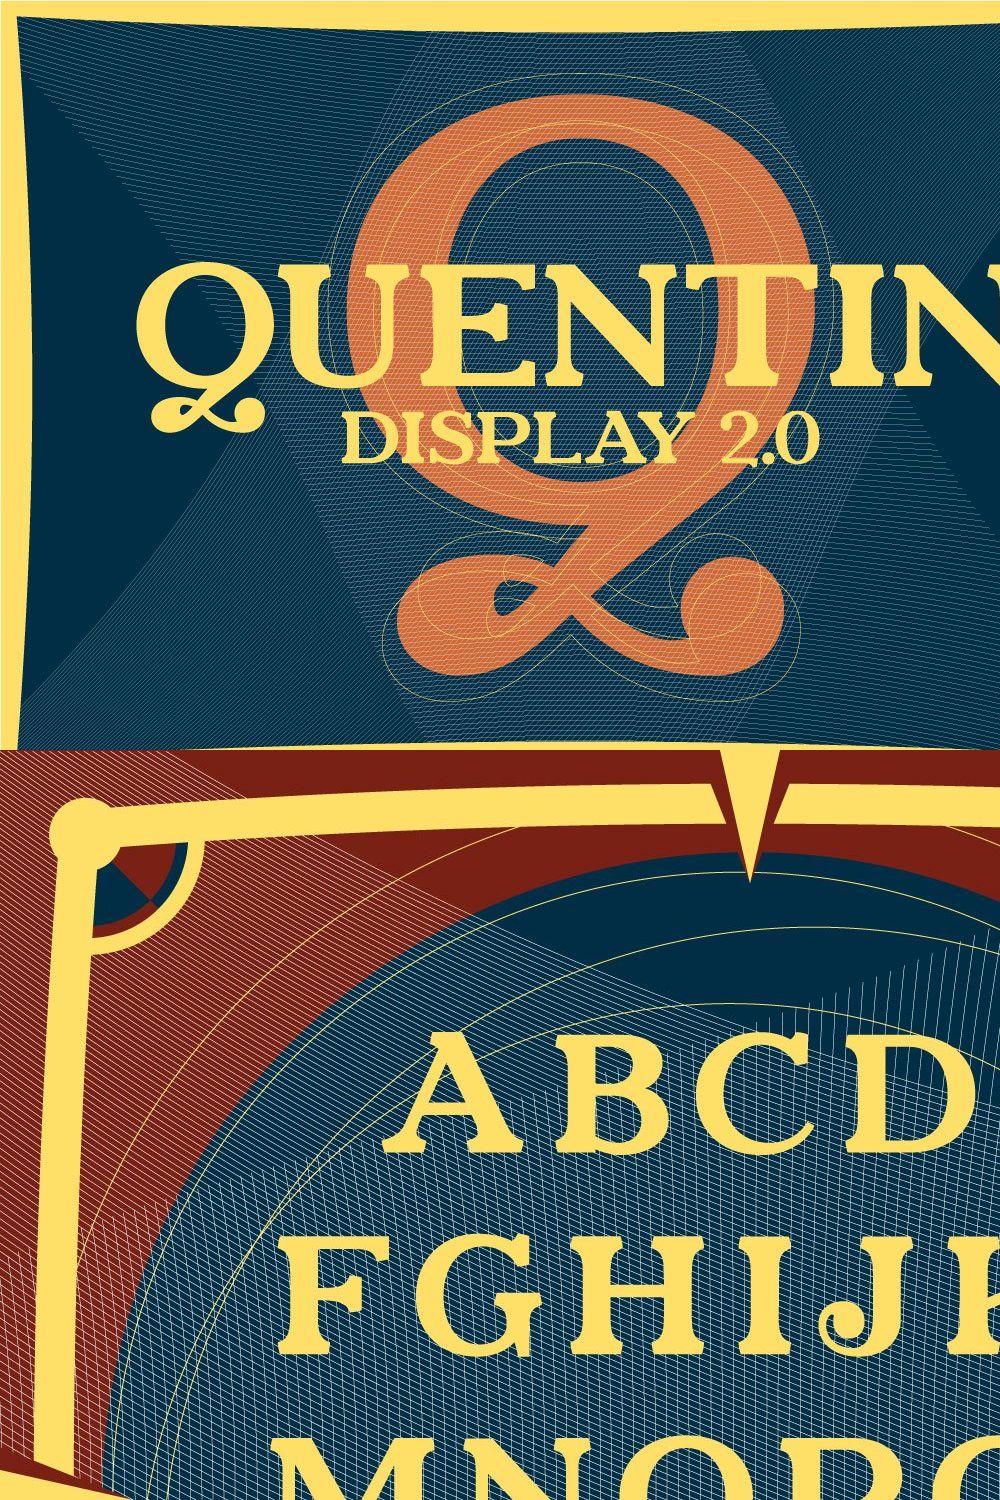 Quentin Version 2.0 pinterest preview image.